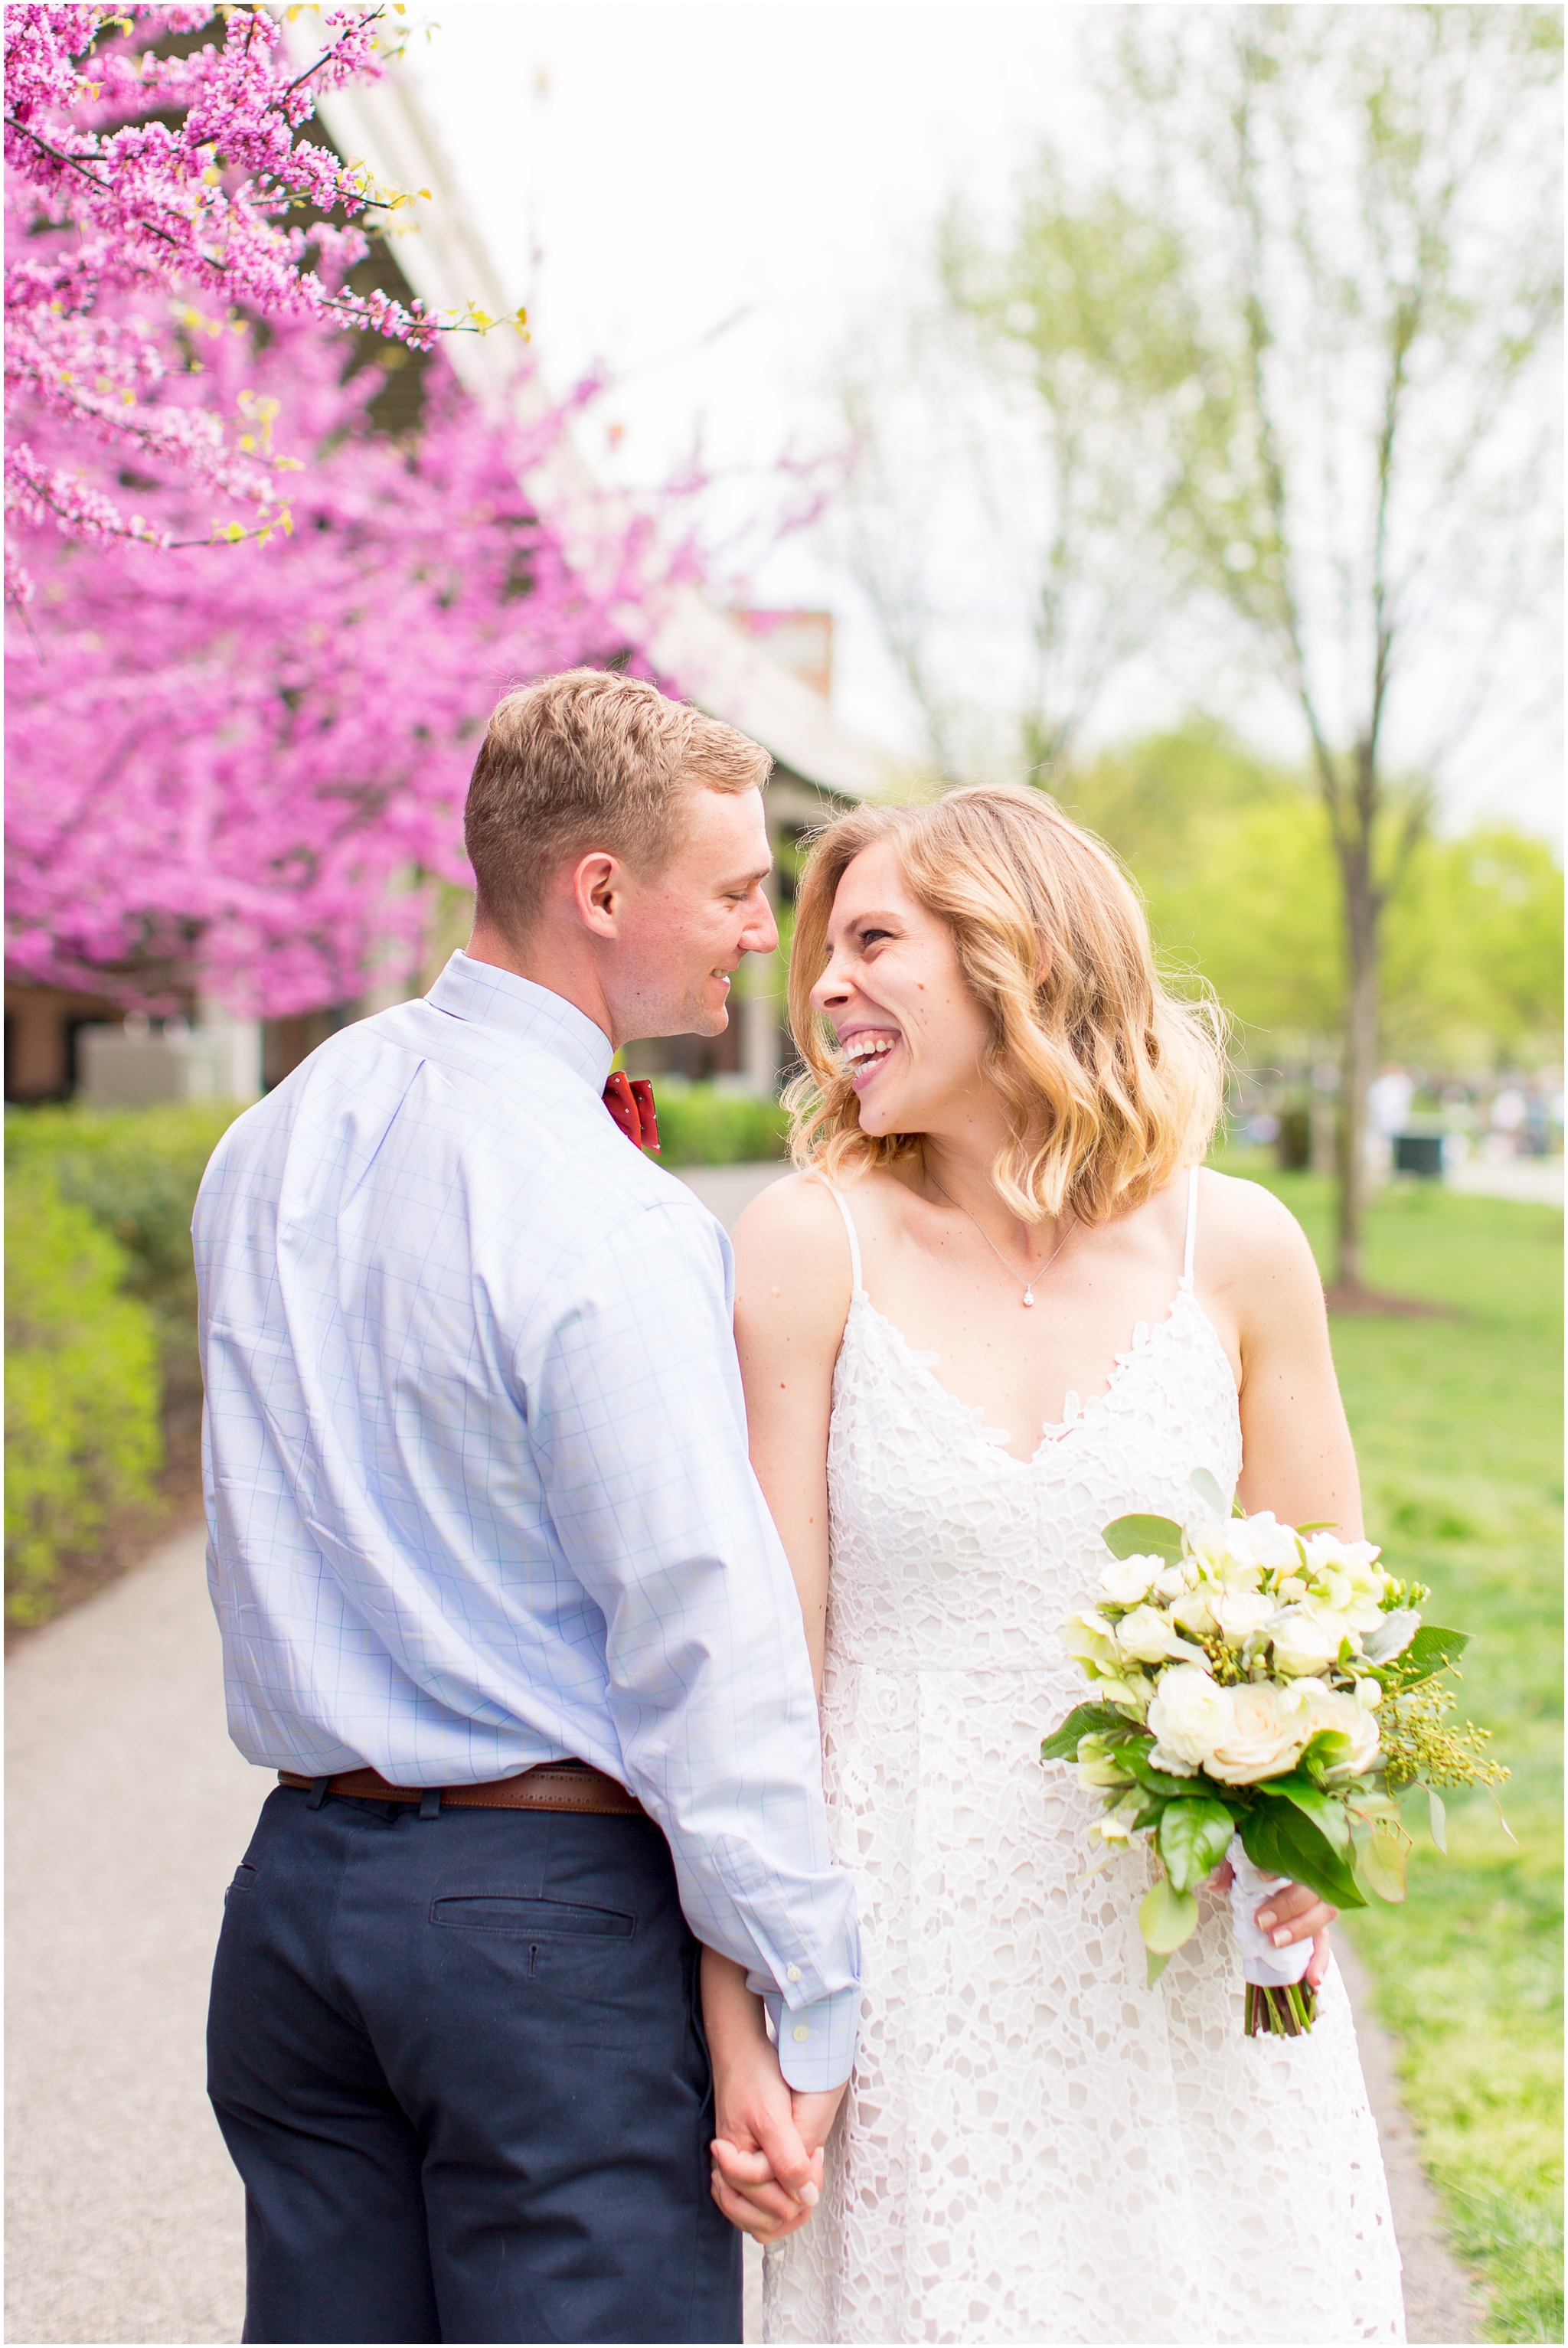 DC elopement photographer captured this Old Post Chapel wedding on Fort Meyer and along the Georgetown waterfront. This DC elopement included cherry blossom wedding photos and Georgetown wedding portraits. This wedding includes creative ideas for something blue and something borrowed!